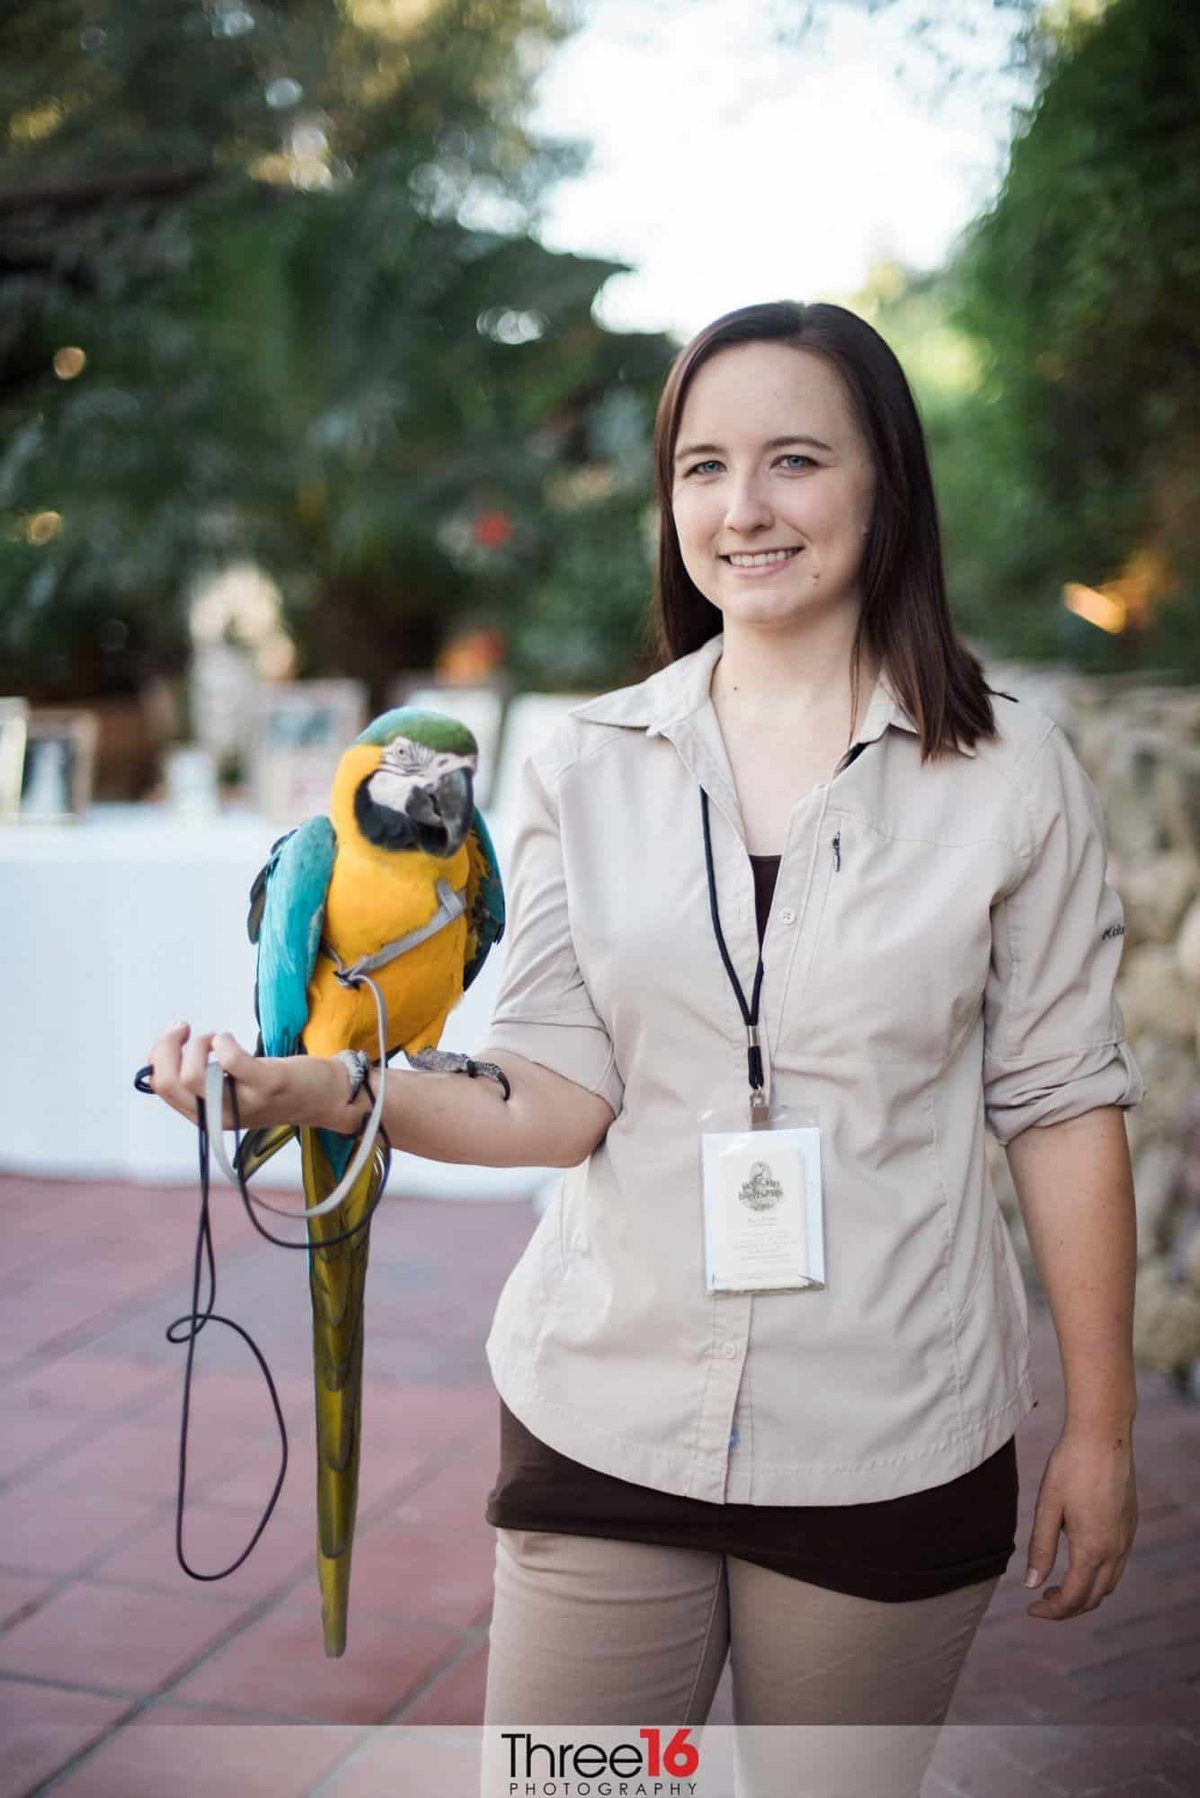 A Rancho Las Lomas Zoo trainer and her parrot